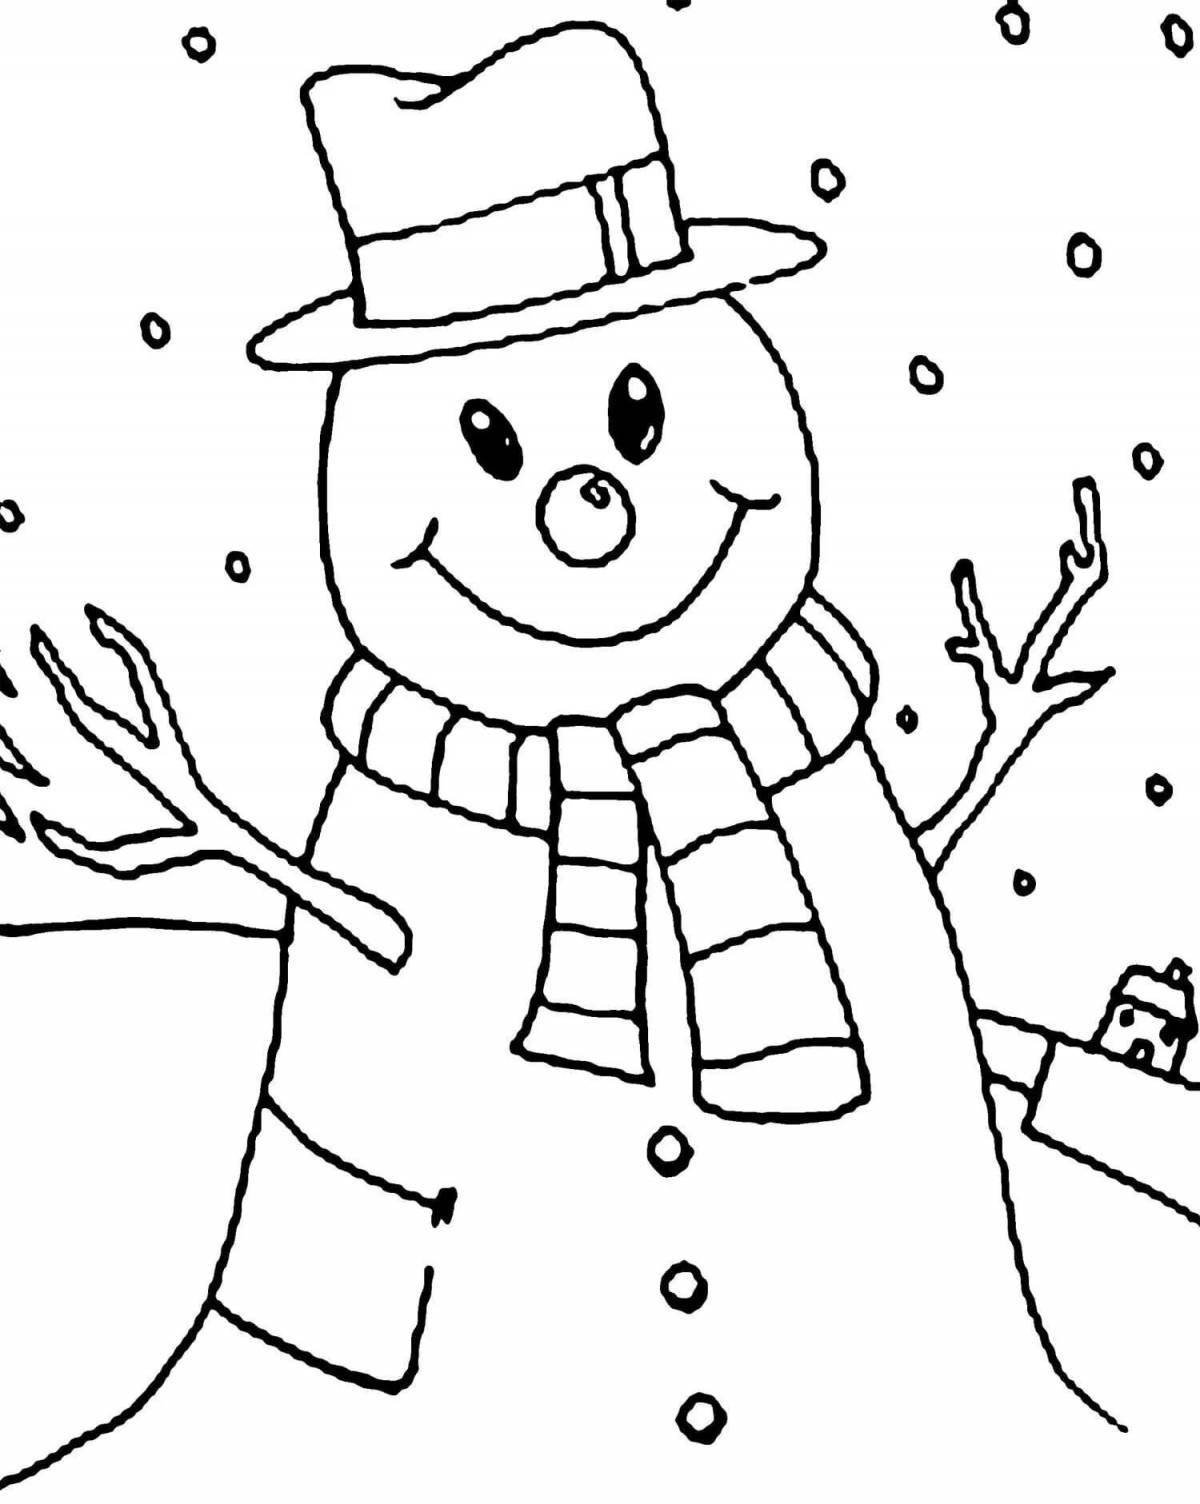 Glowing snowman coloring page